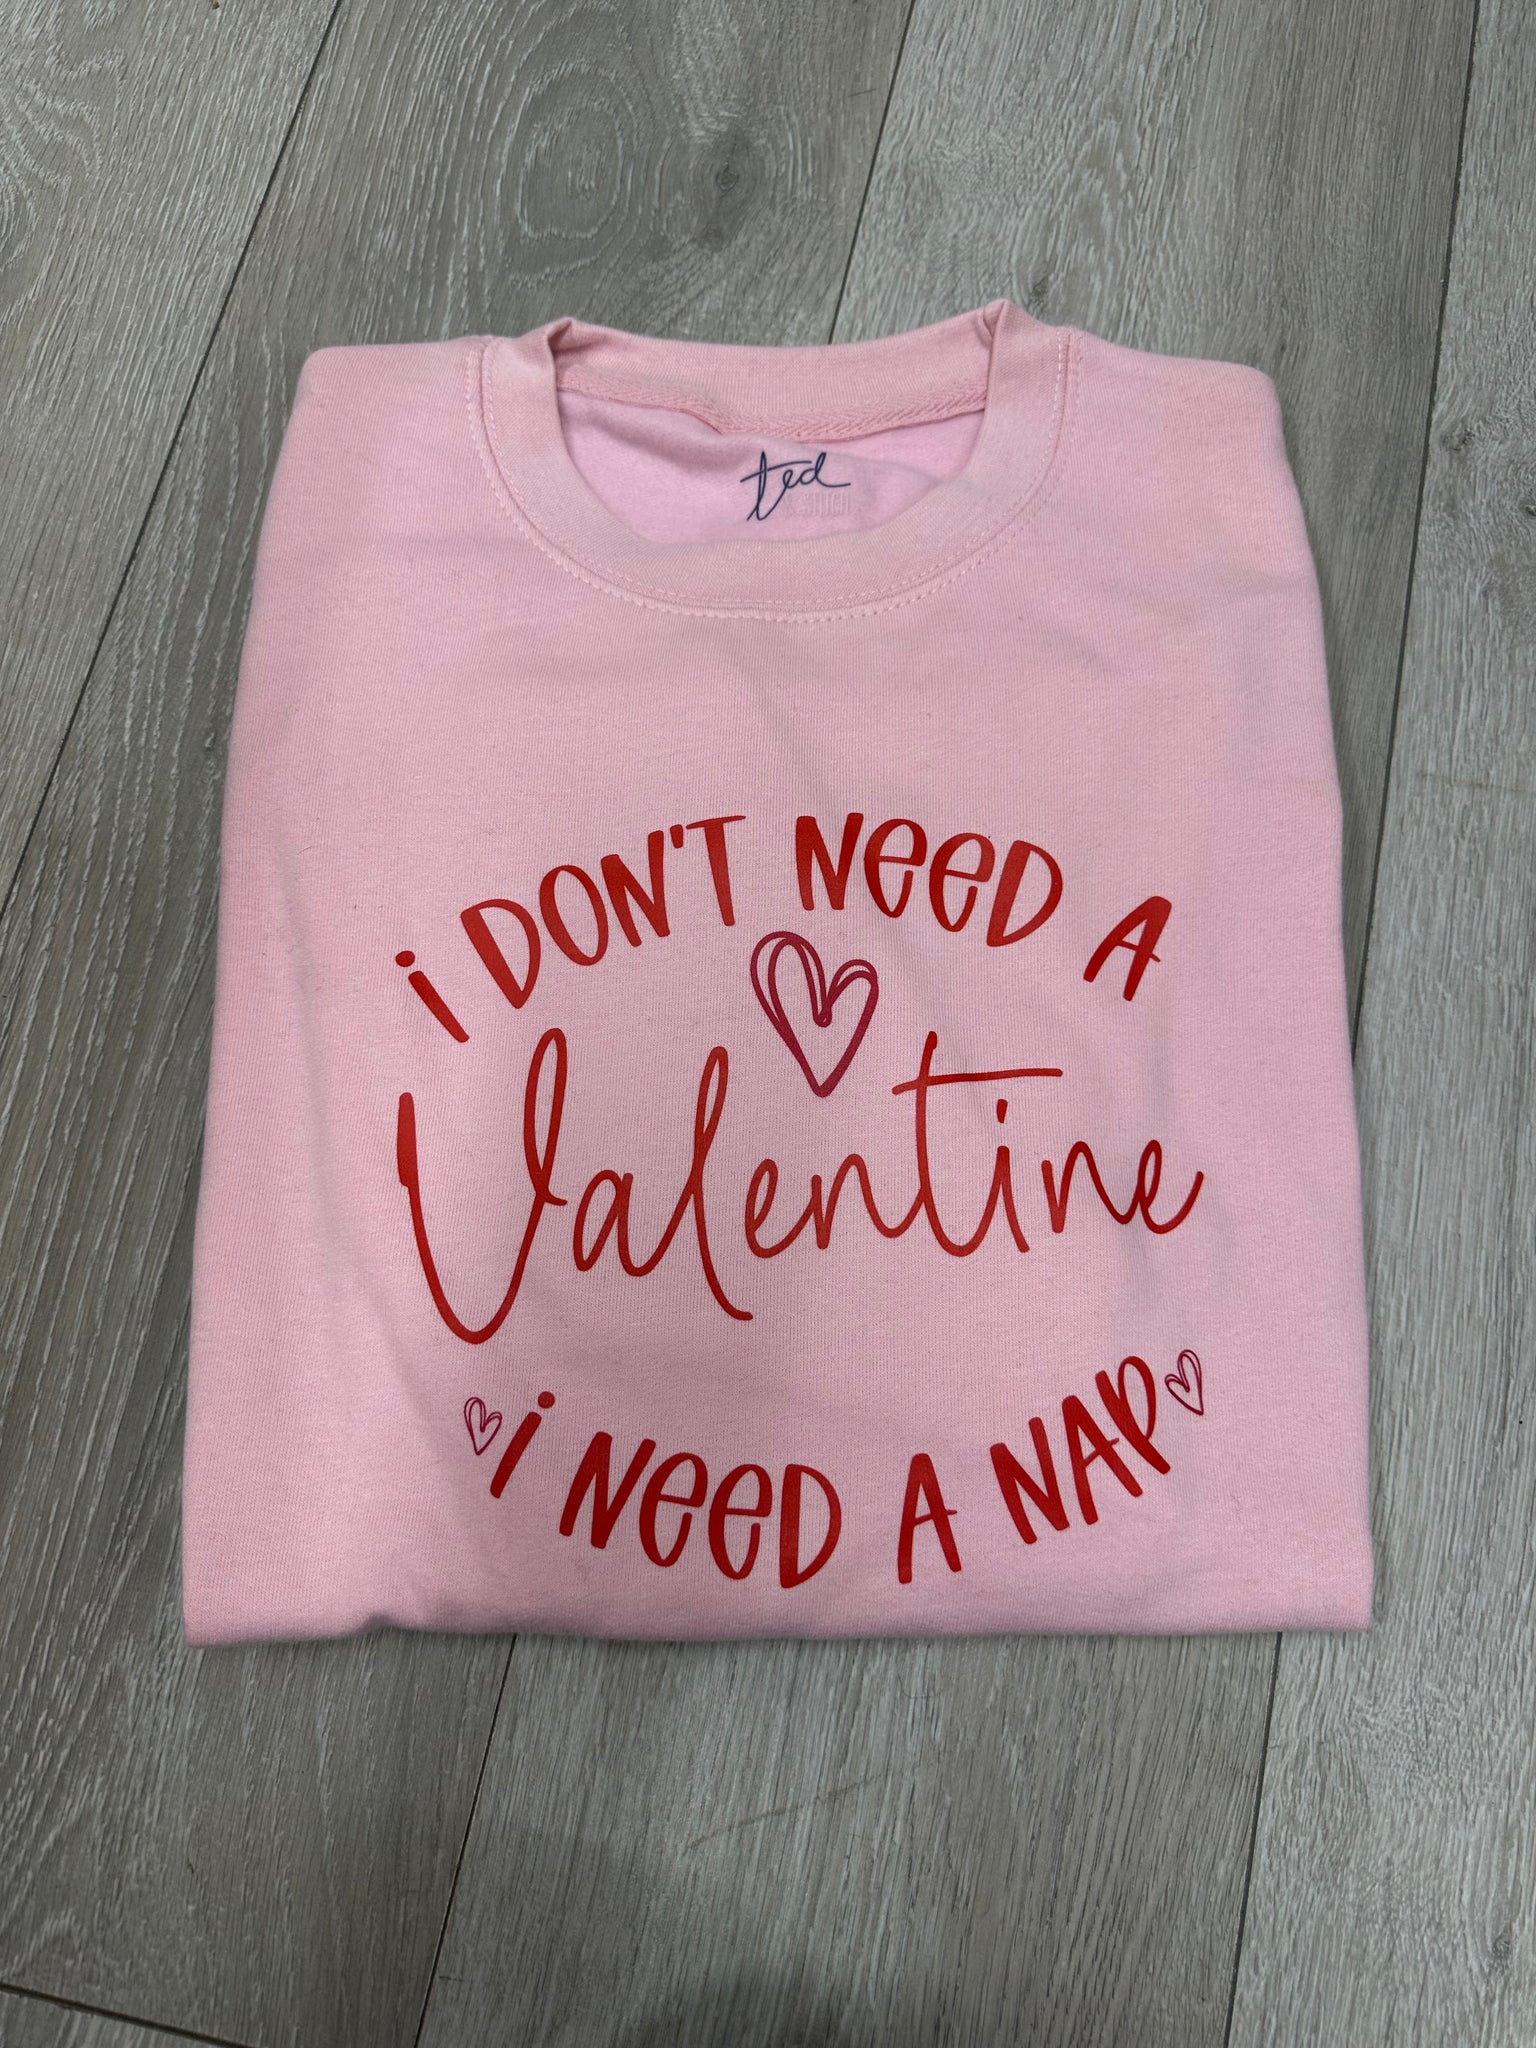 SAMPLE SALE I don't need a valentine, I need a nap Jumper Size S